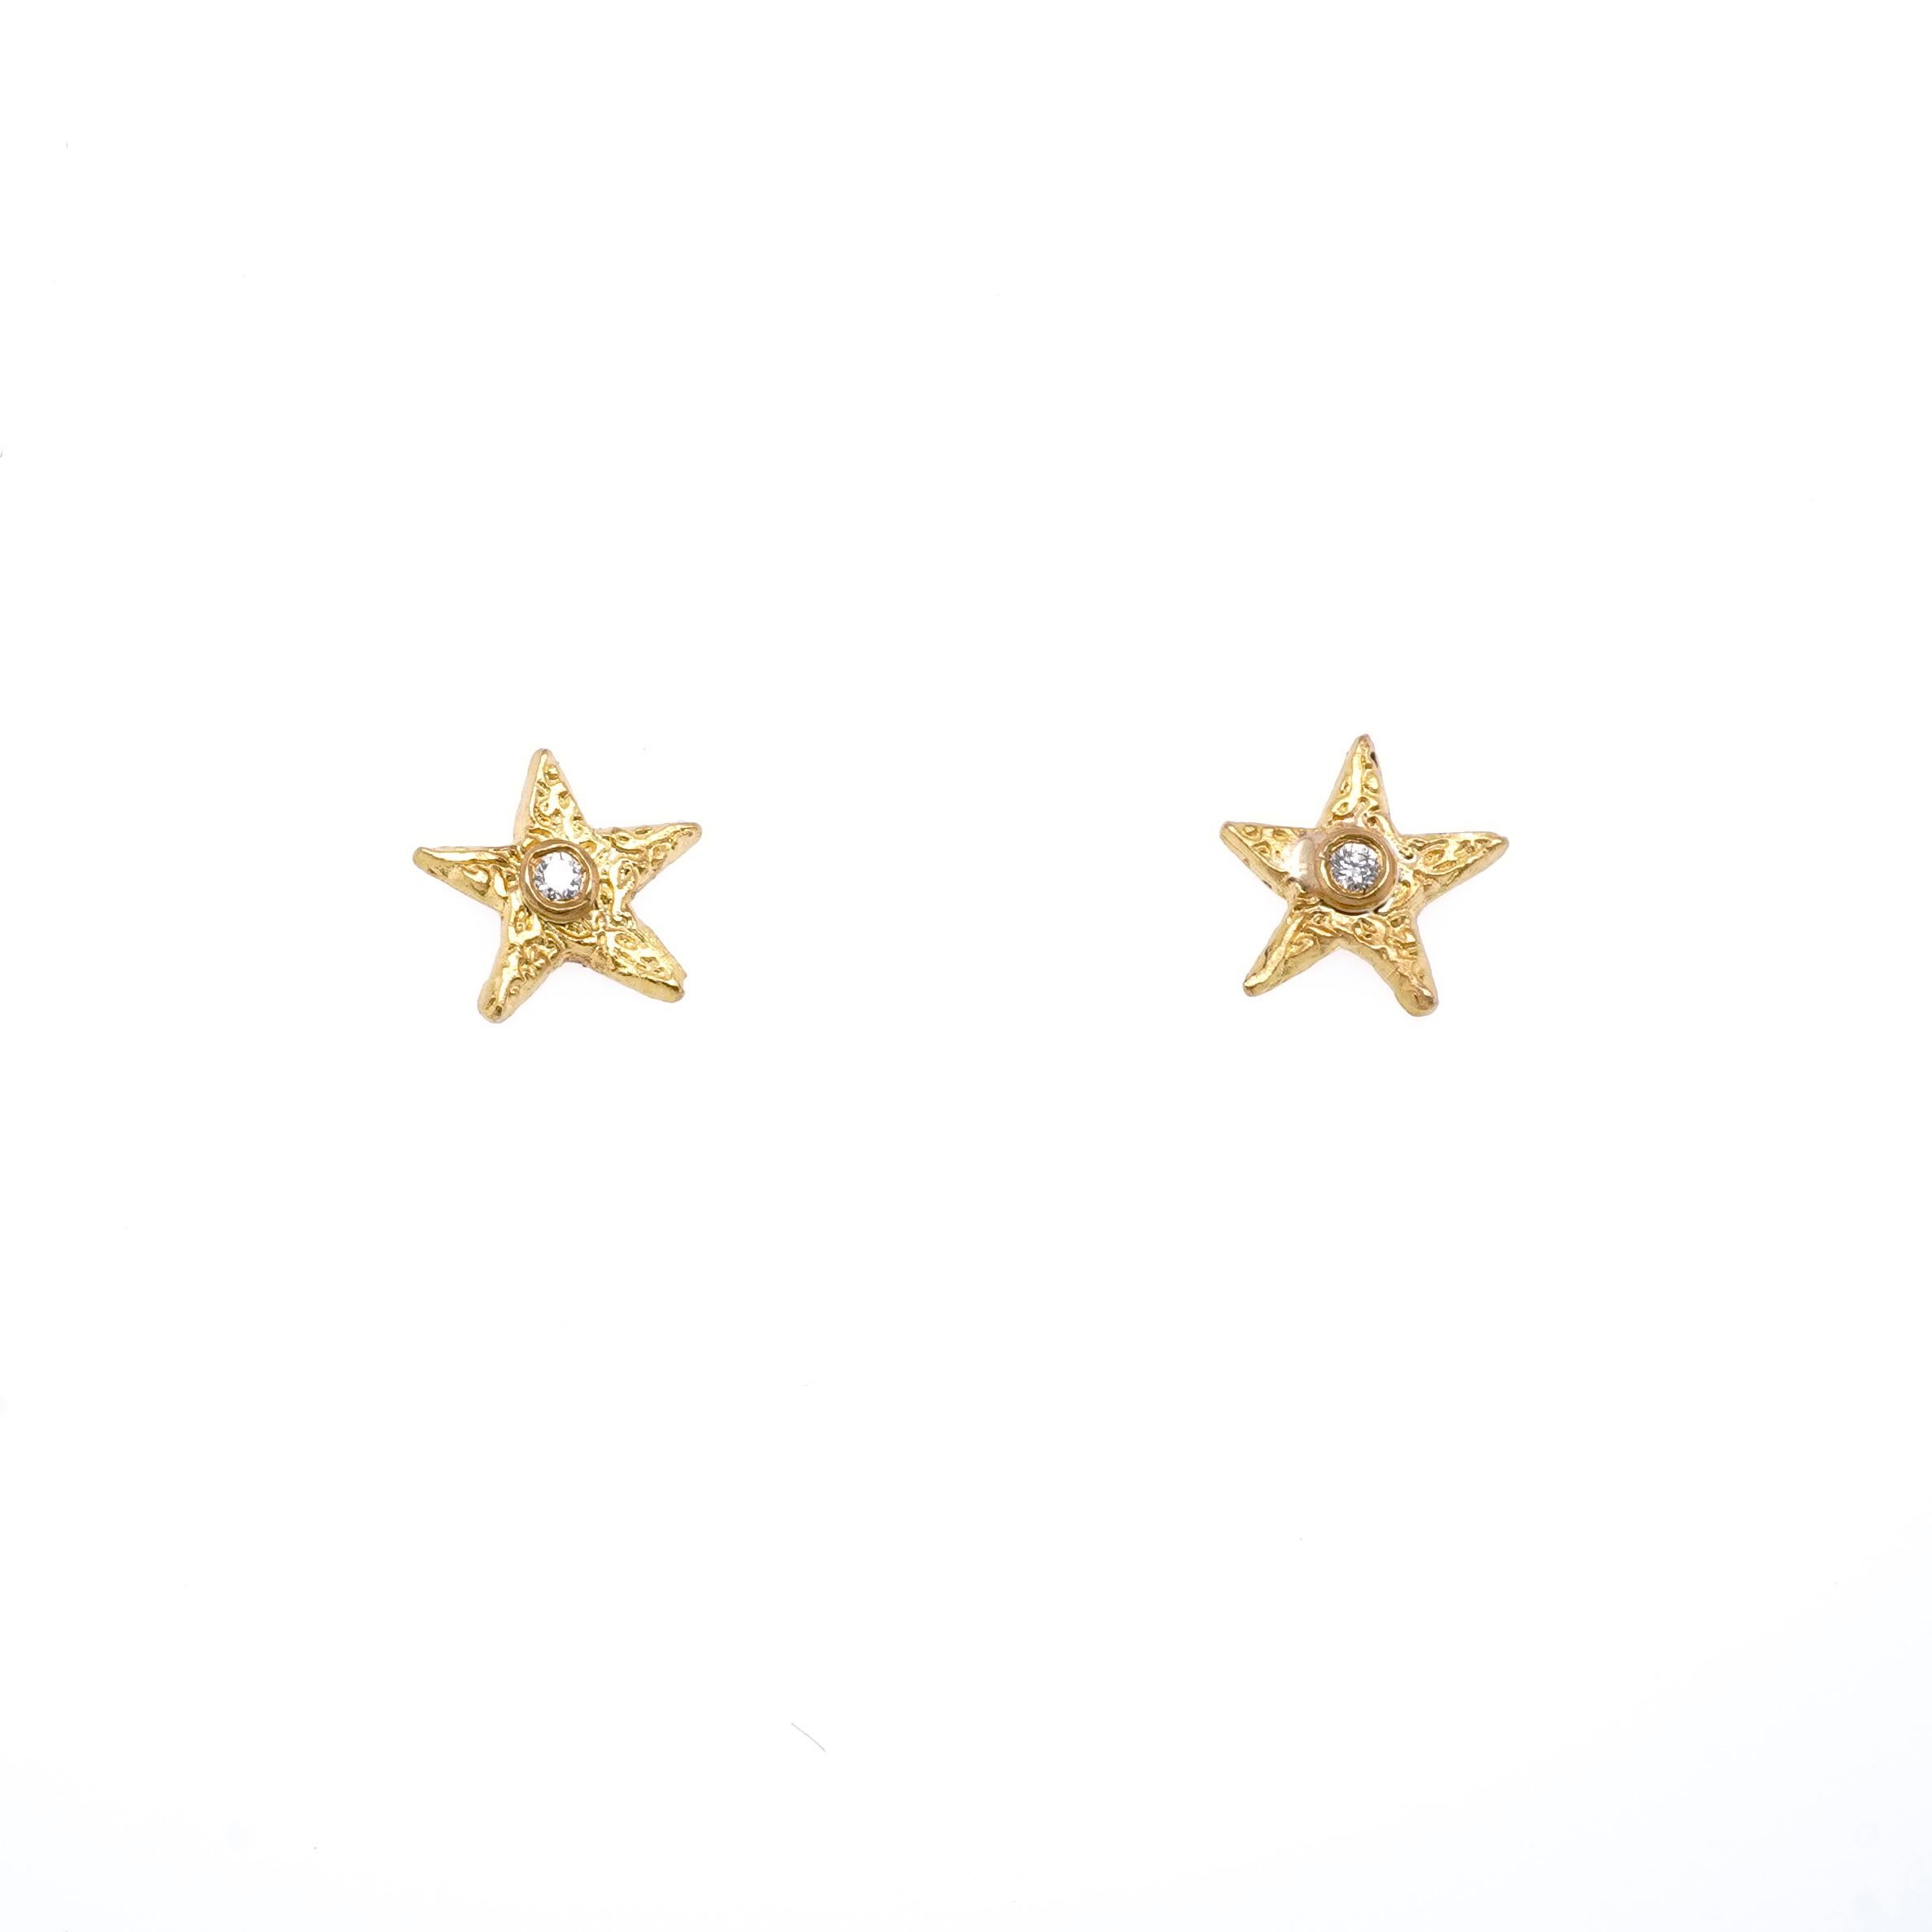 Textured, Star Stud Earrings with Diamonds, in 24kt Gold For Sale 4